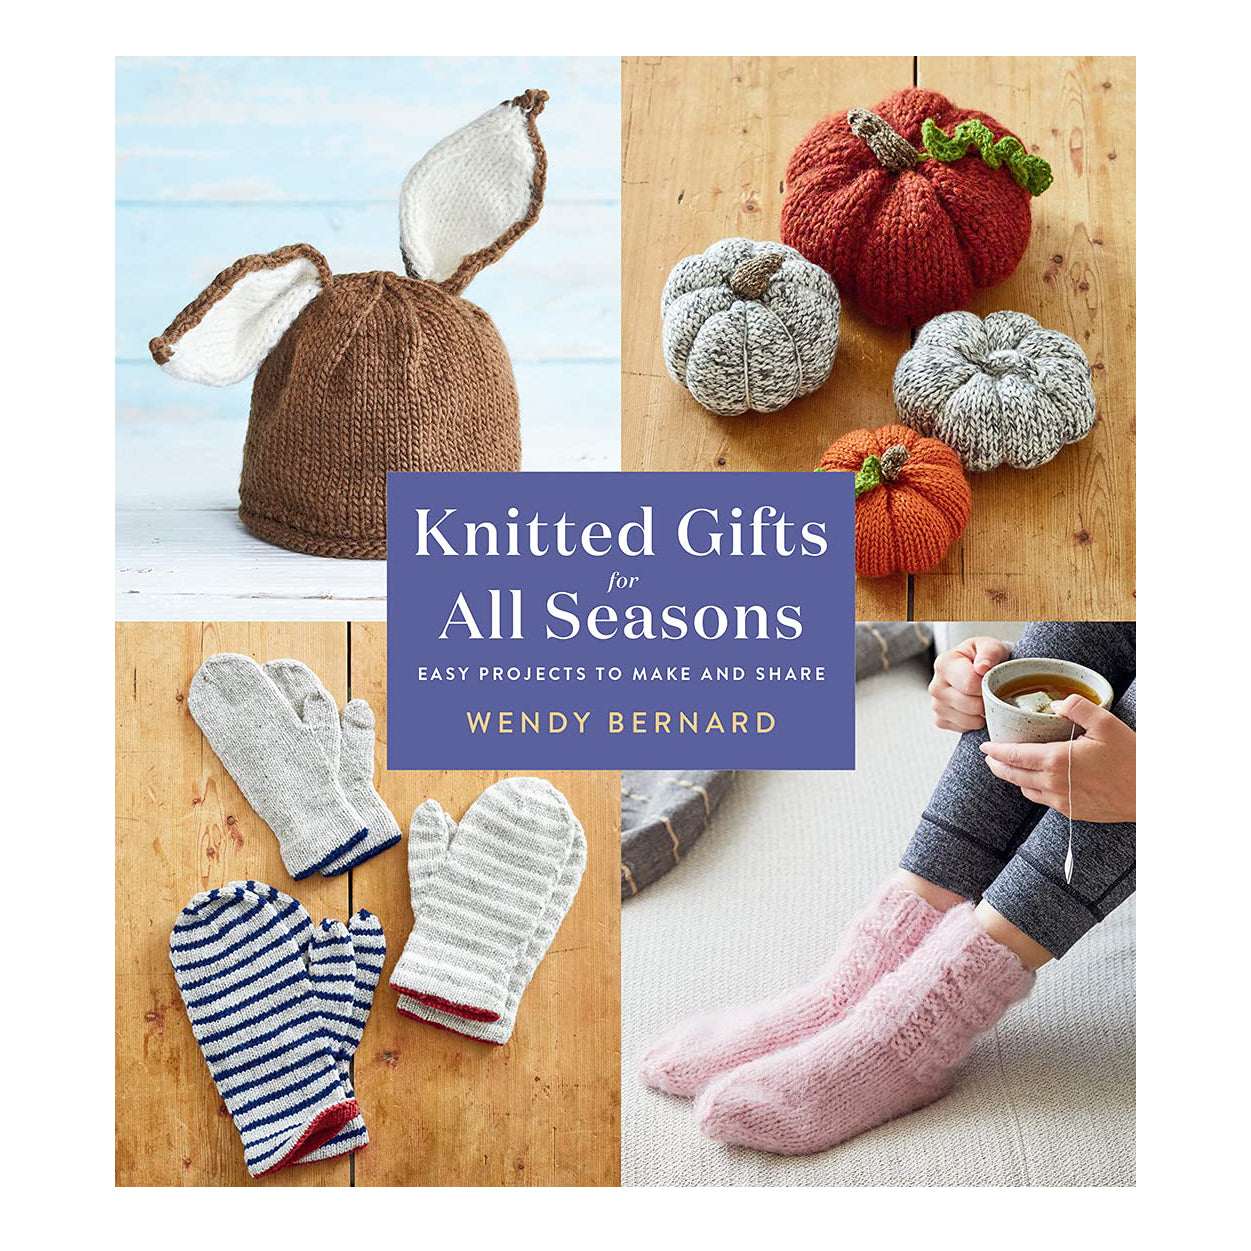 Knitted Gifts for All Seasons (Wendy Bernard)